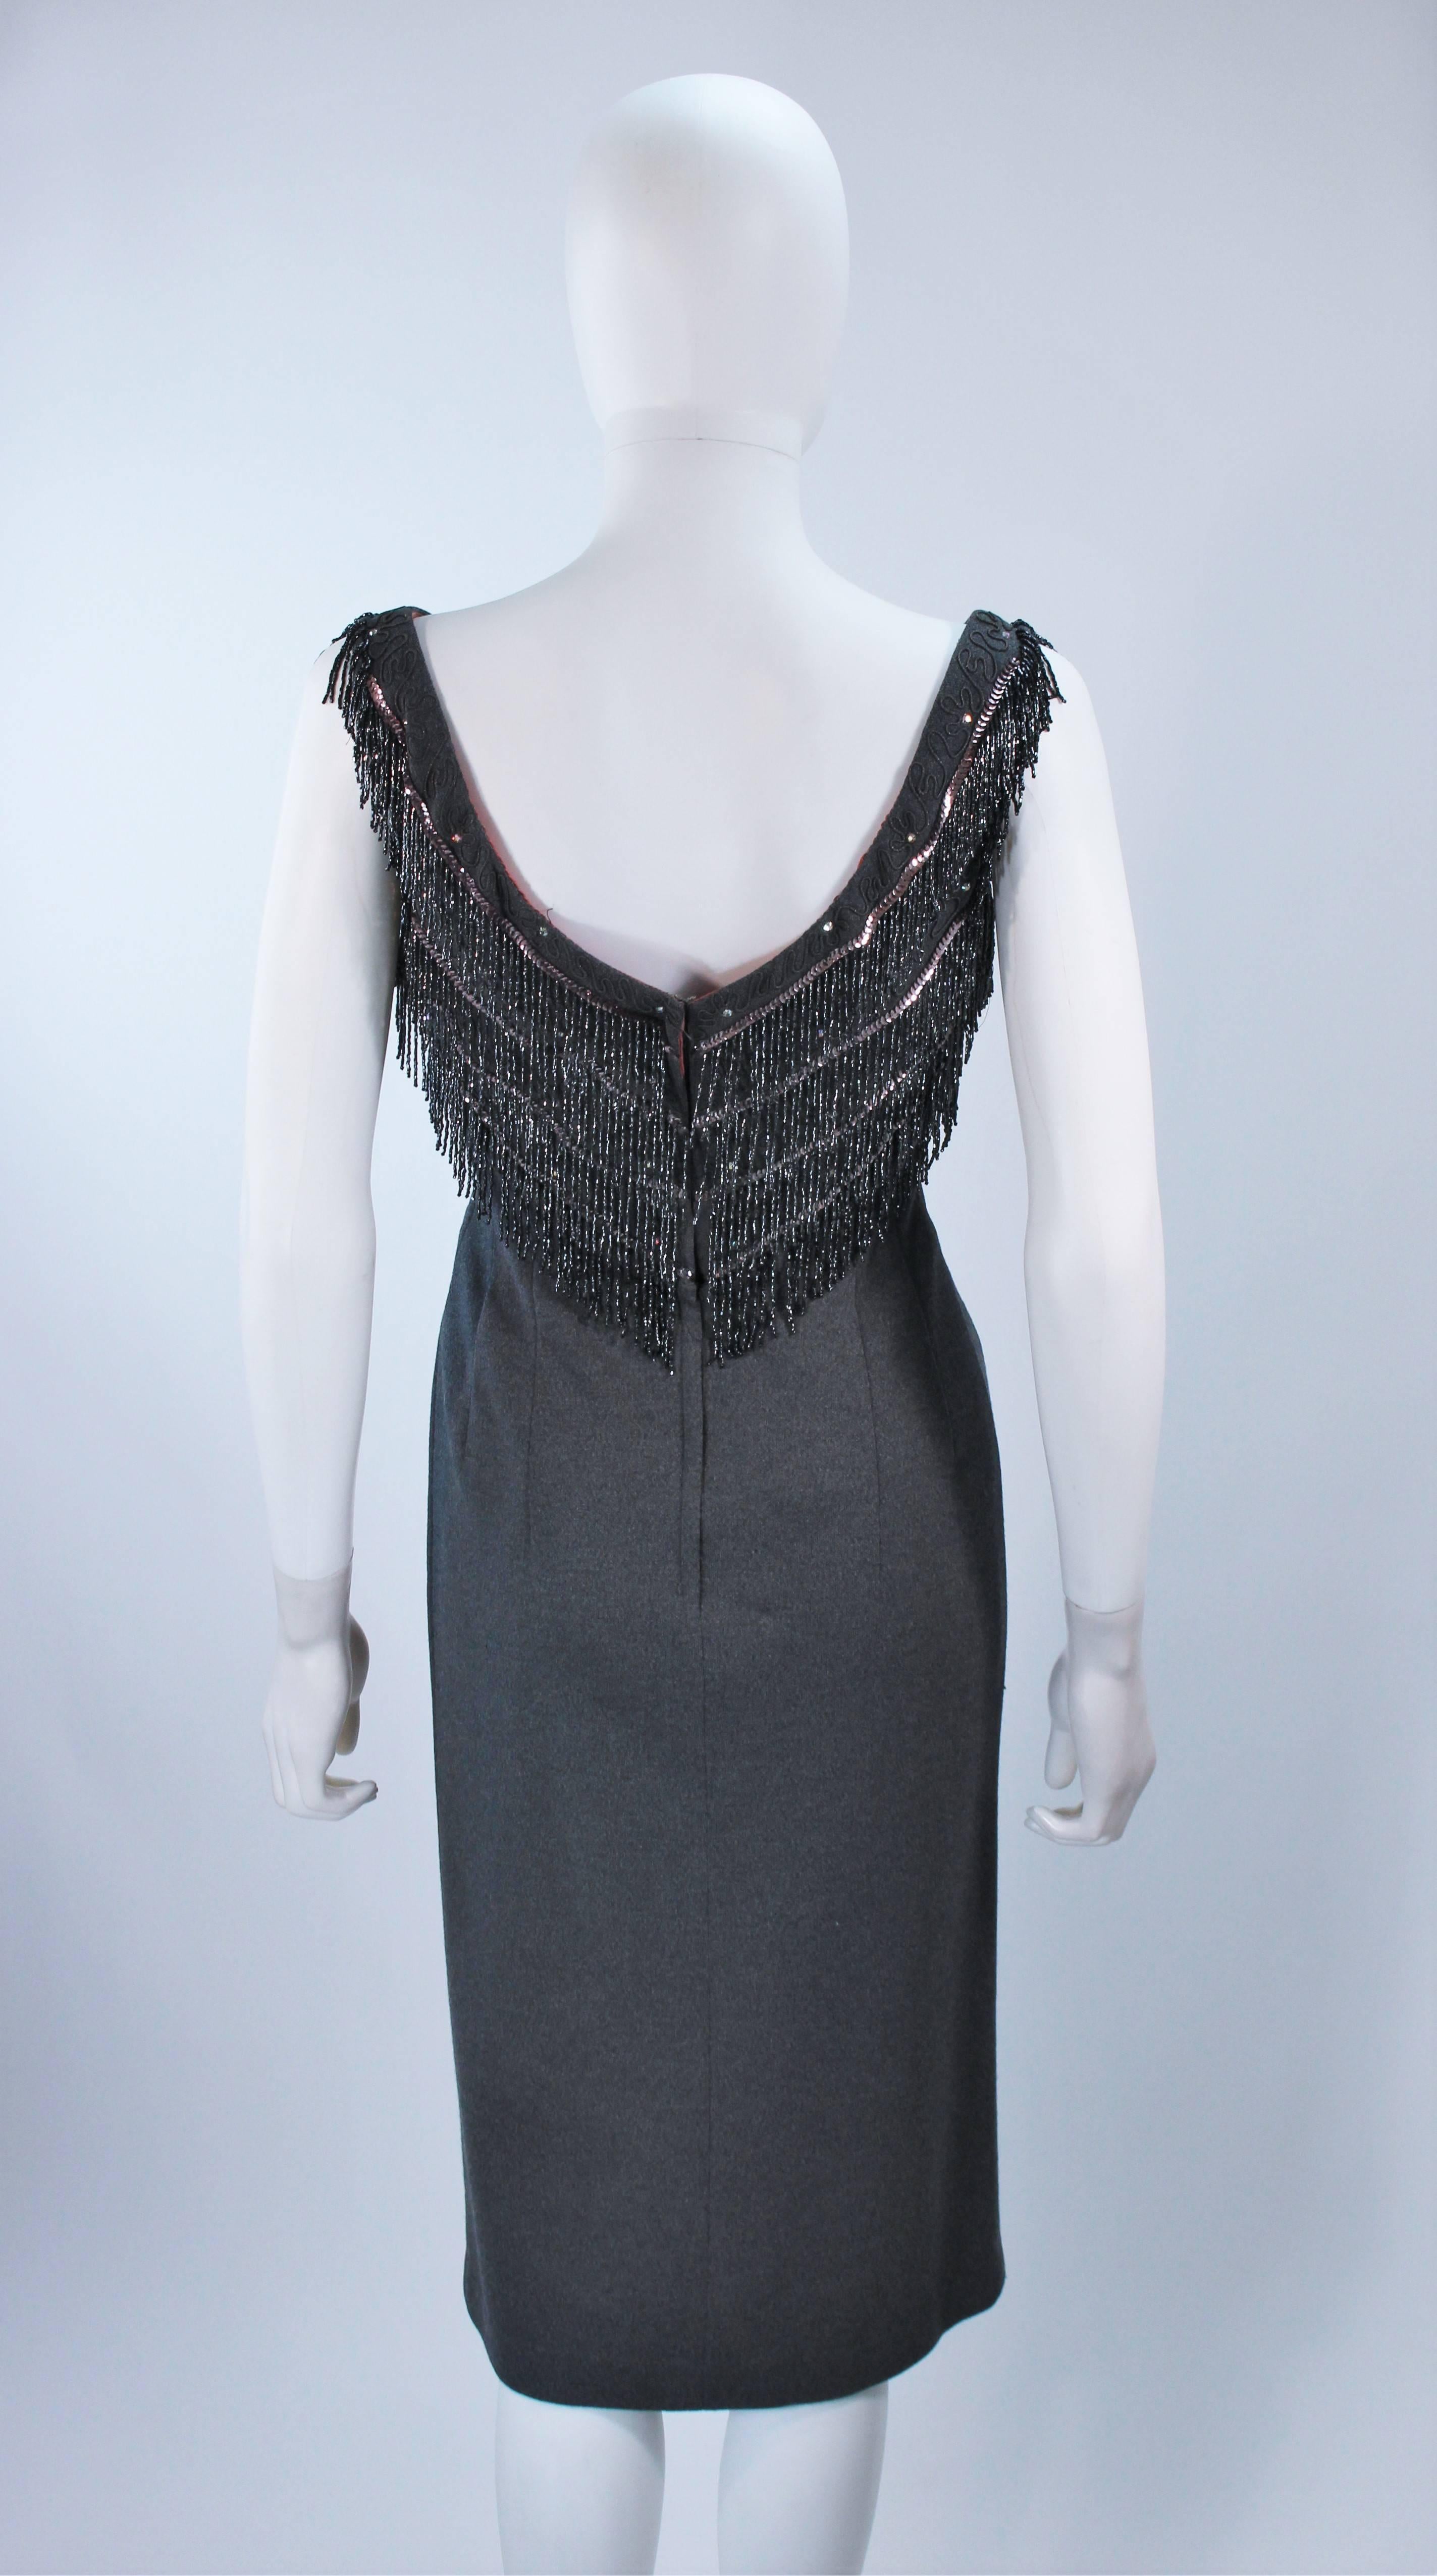 SYDNEY NORTH 1970's Grey Stretch Knit Cocktail Dress with Beaded Fringe Size 8  For Sale 1